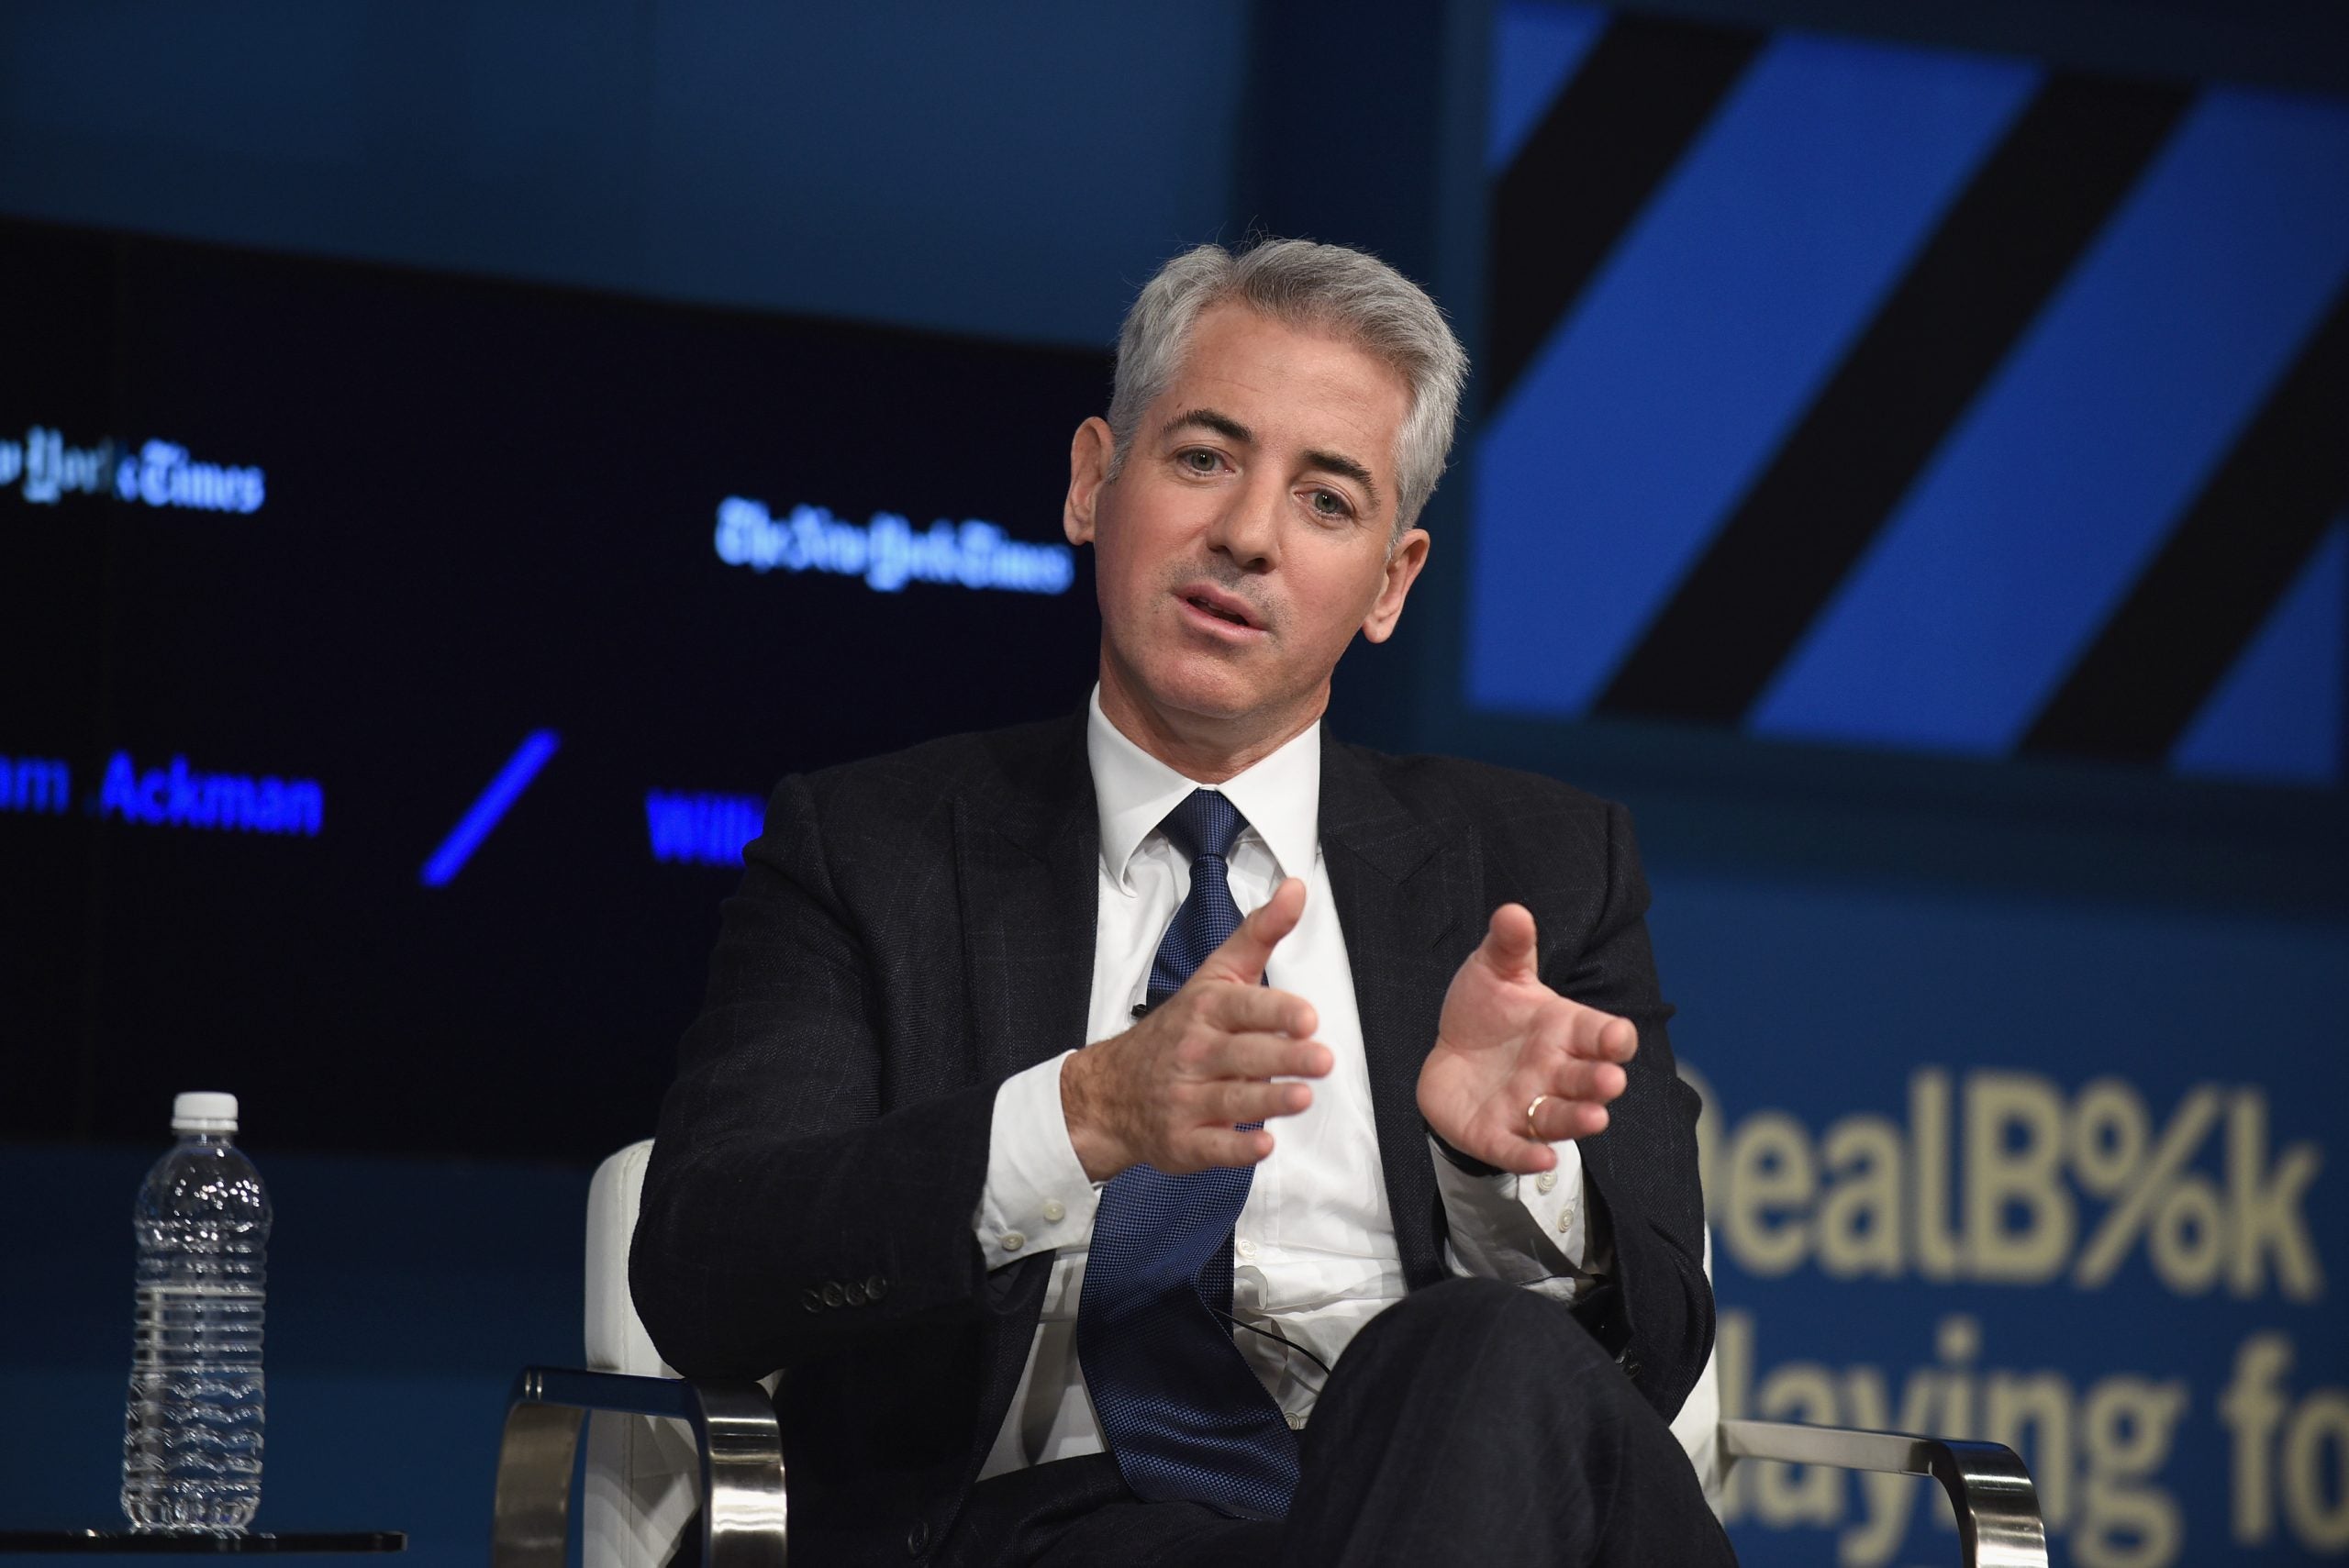 Bill Ackman, The Man Who Targeted Claudine Gay, Claims Martin Luther King Jr. Would Have 'Opposed' Diversity, Equity And Inclusion Efforts